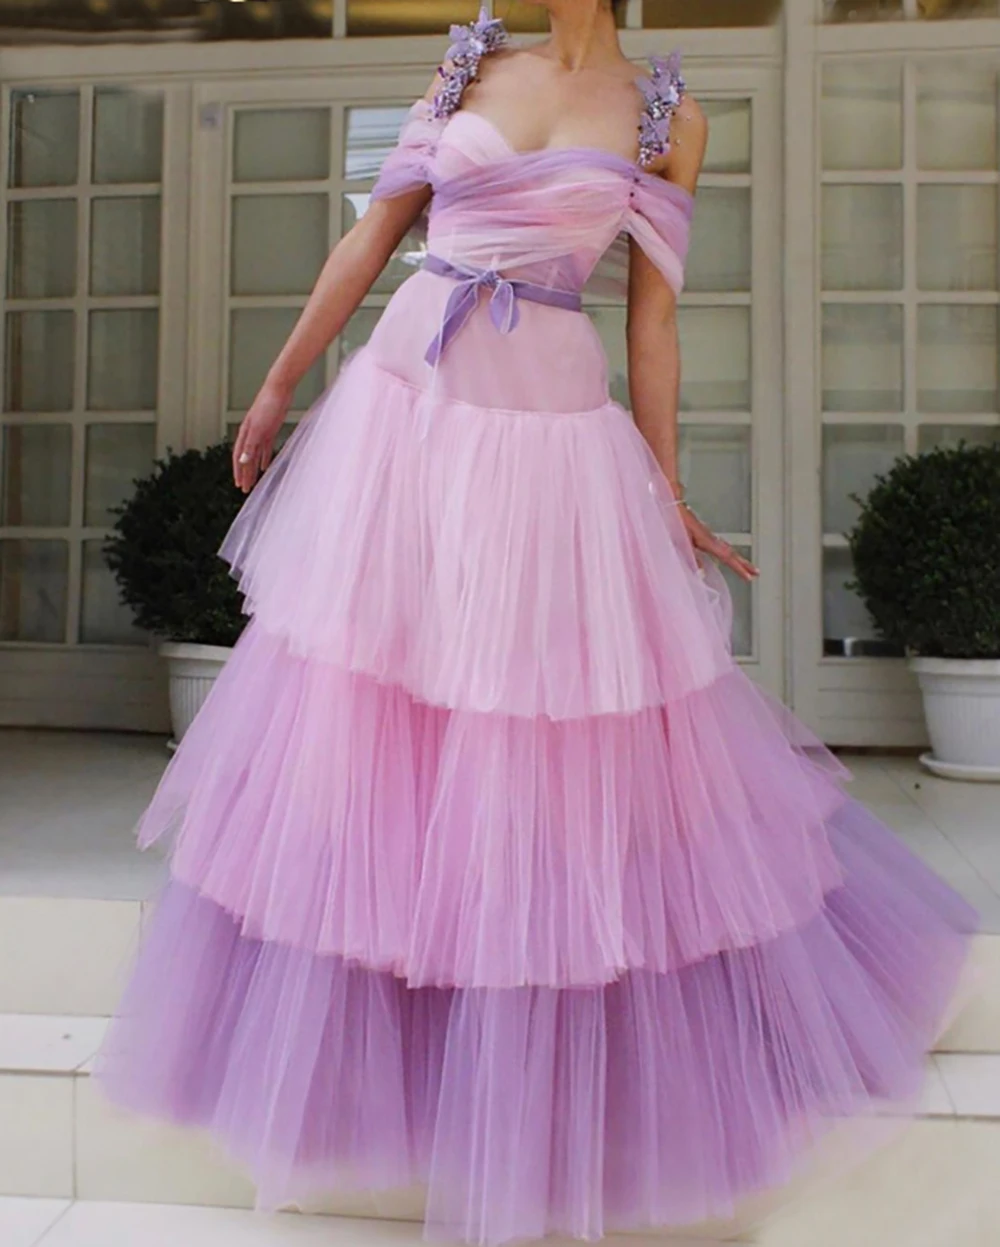 

Sweetheart Colorful Prom Dresses Ball Gown Flowers Beaded Straps Party Maxys Long Prom Gown Evening Dresses Robe De Soiree